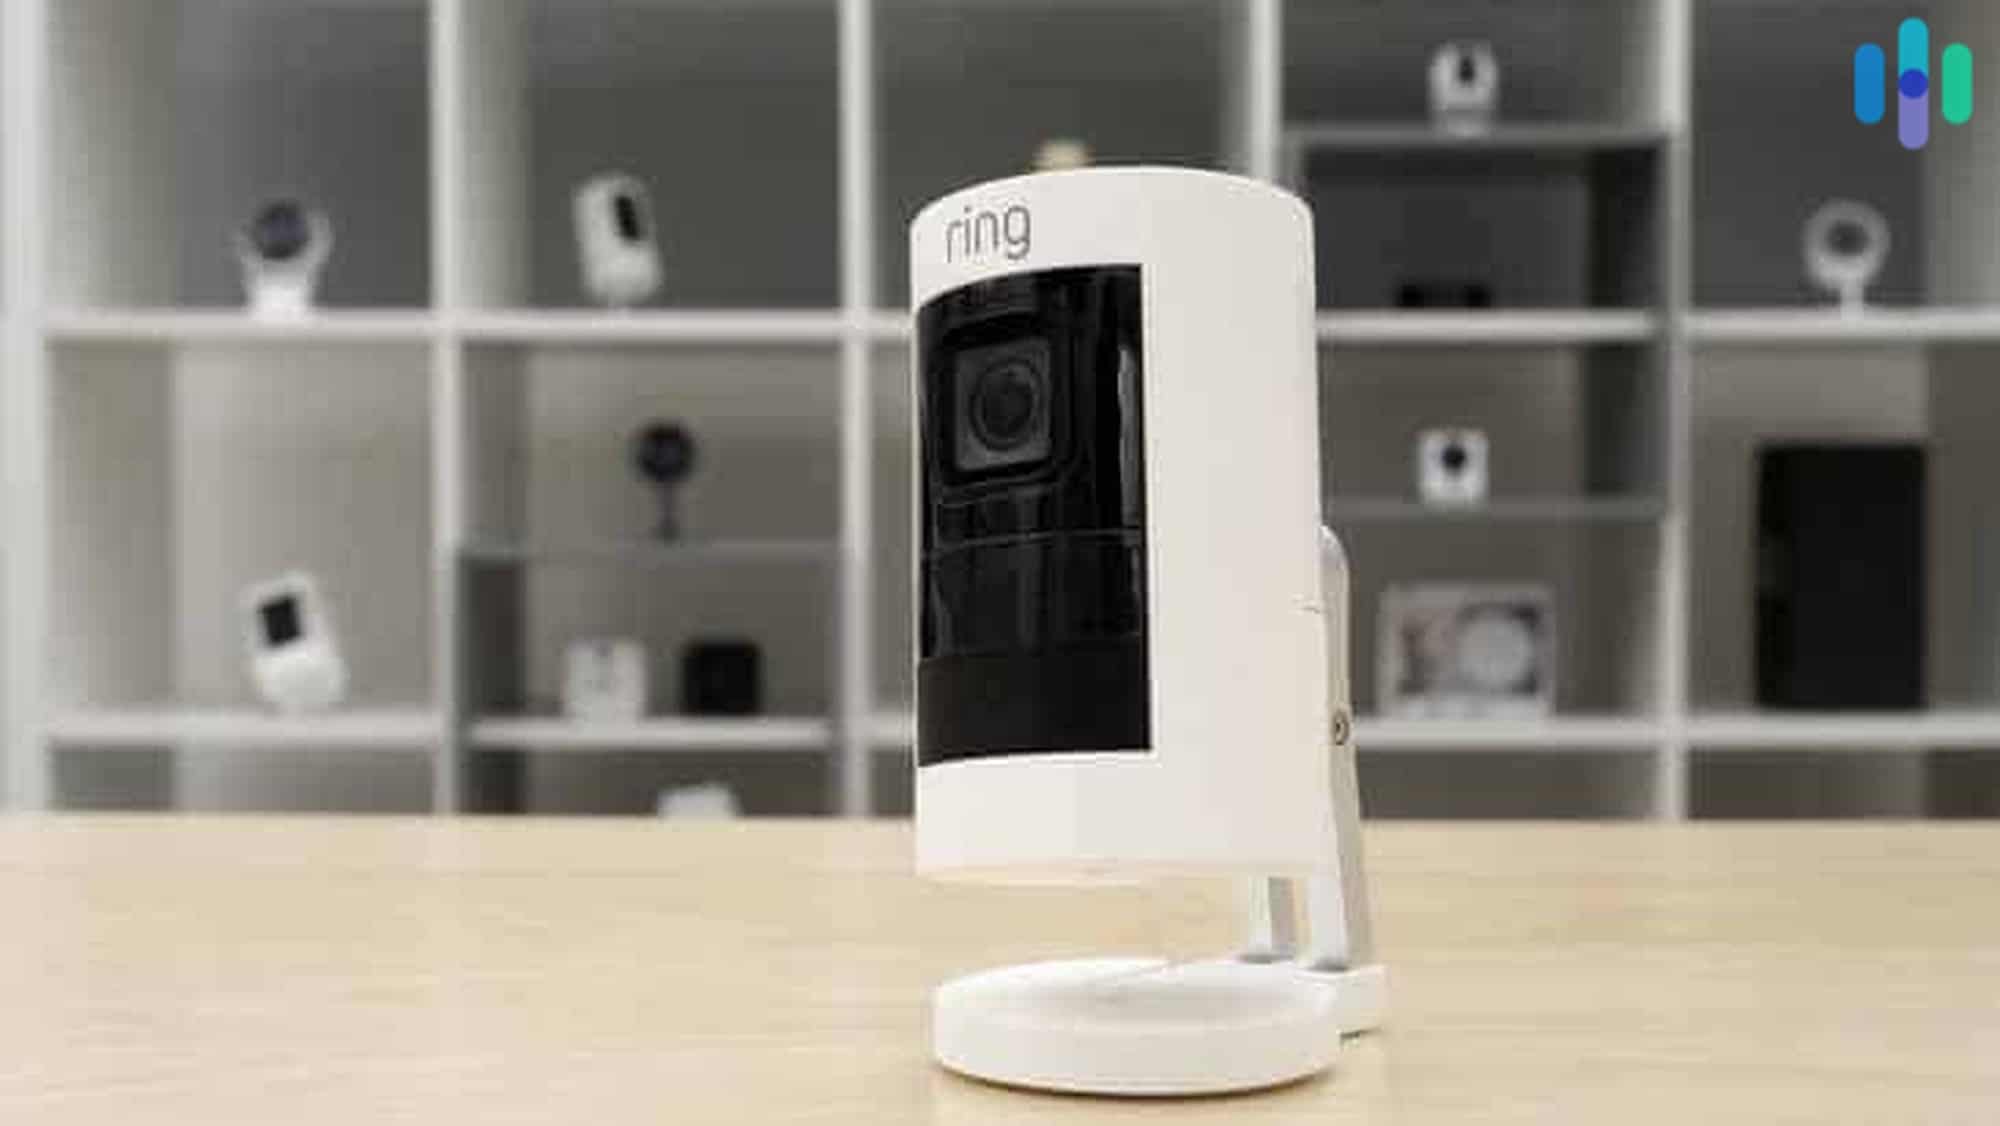 Ring security cameras gave every employee 'full access' to all